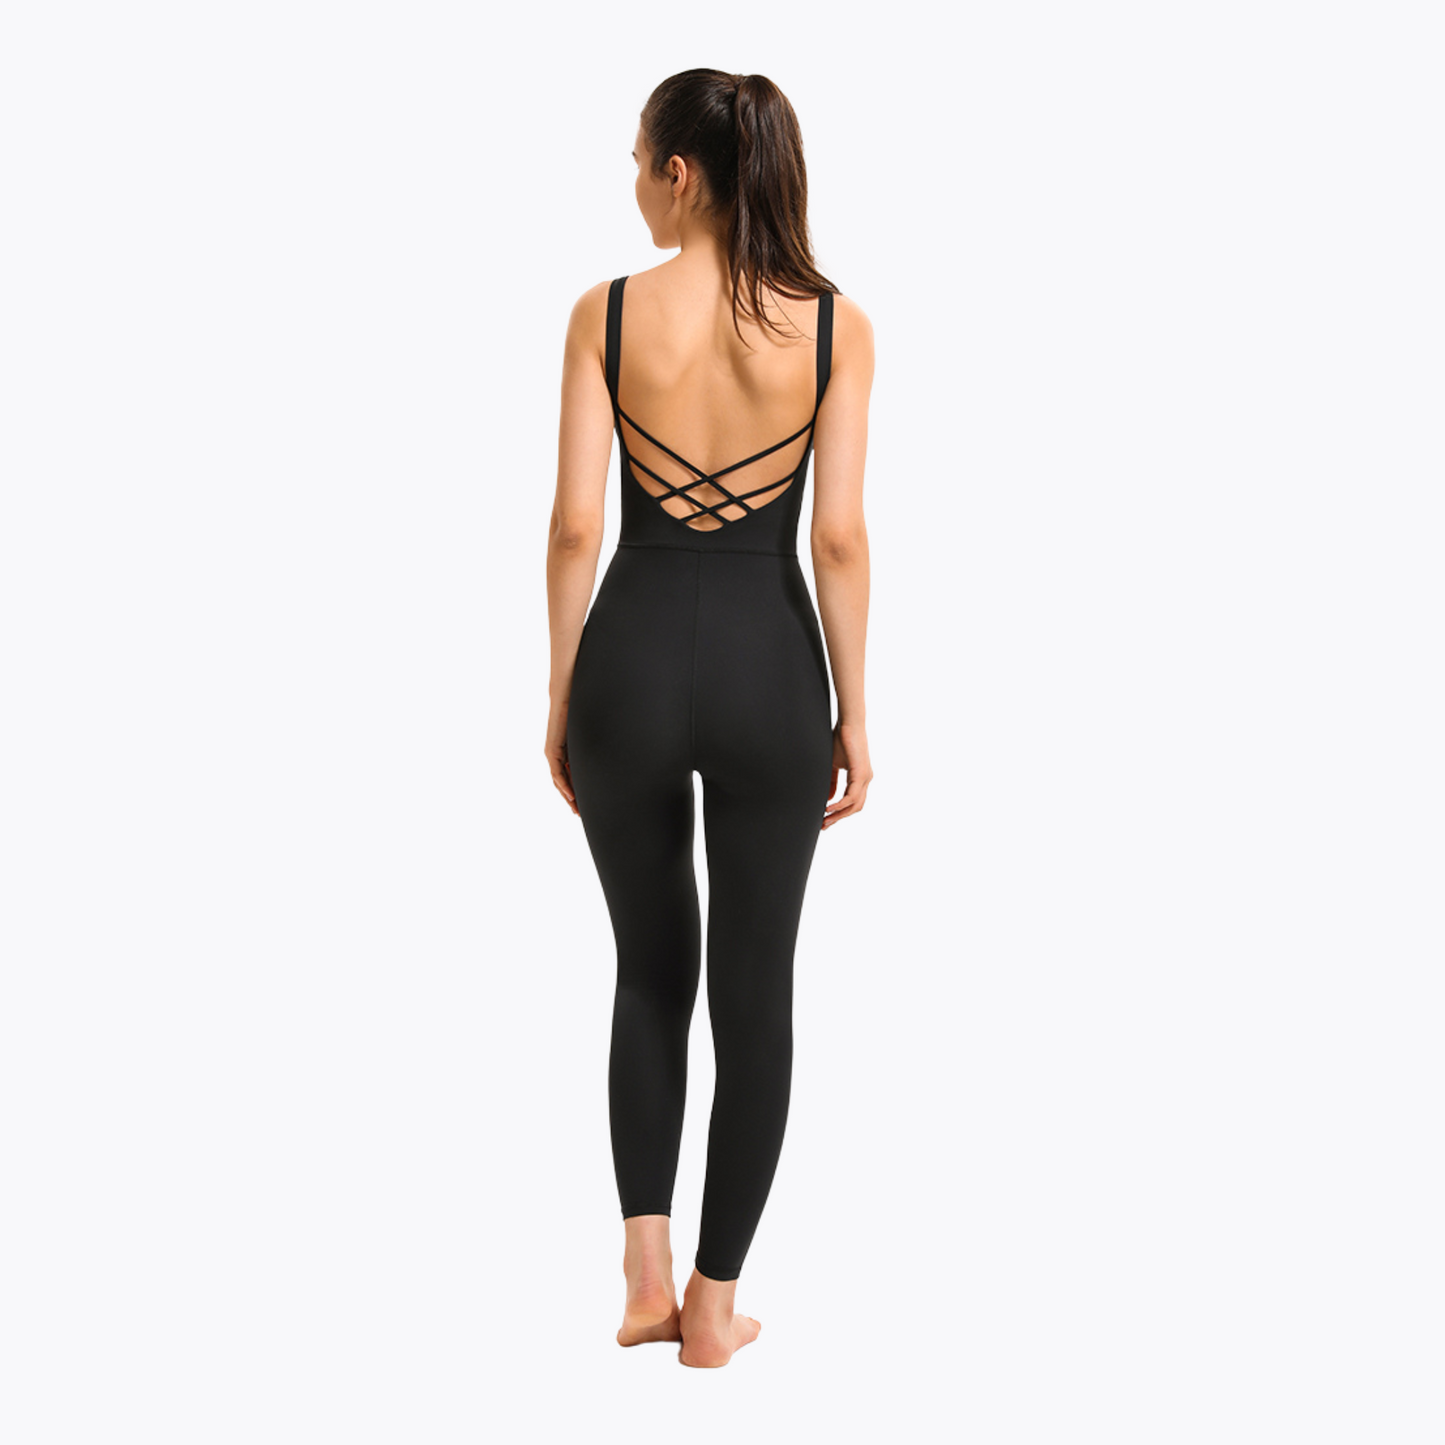 BACK SHOT OF MODEL WEARING A BLACK JUMPSUIT FROM VIBRAS ACTIVEWEAR ON A WHITE BACKGROUND.